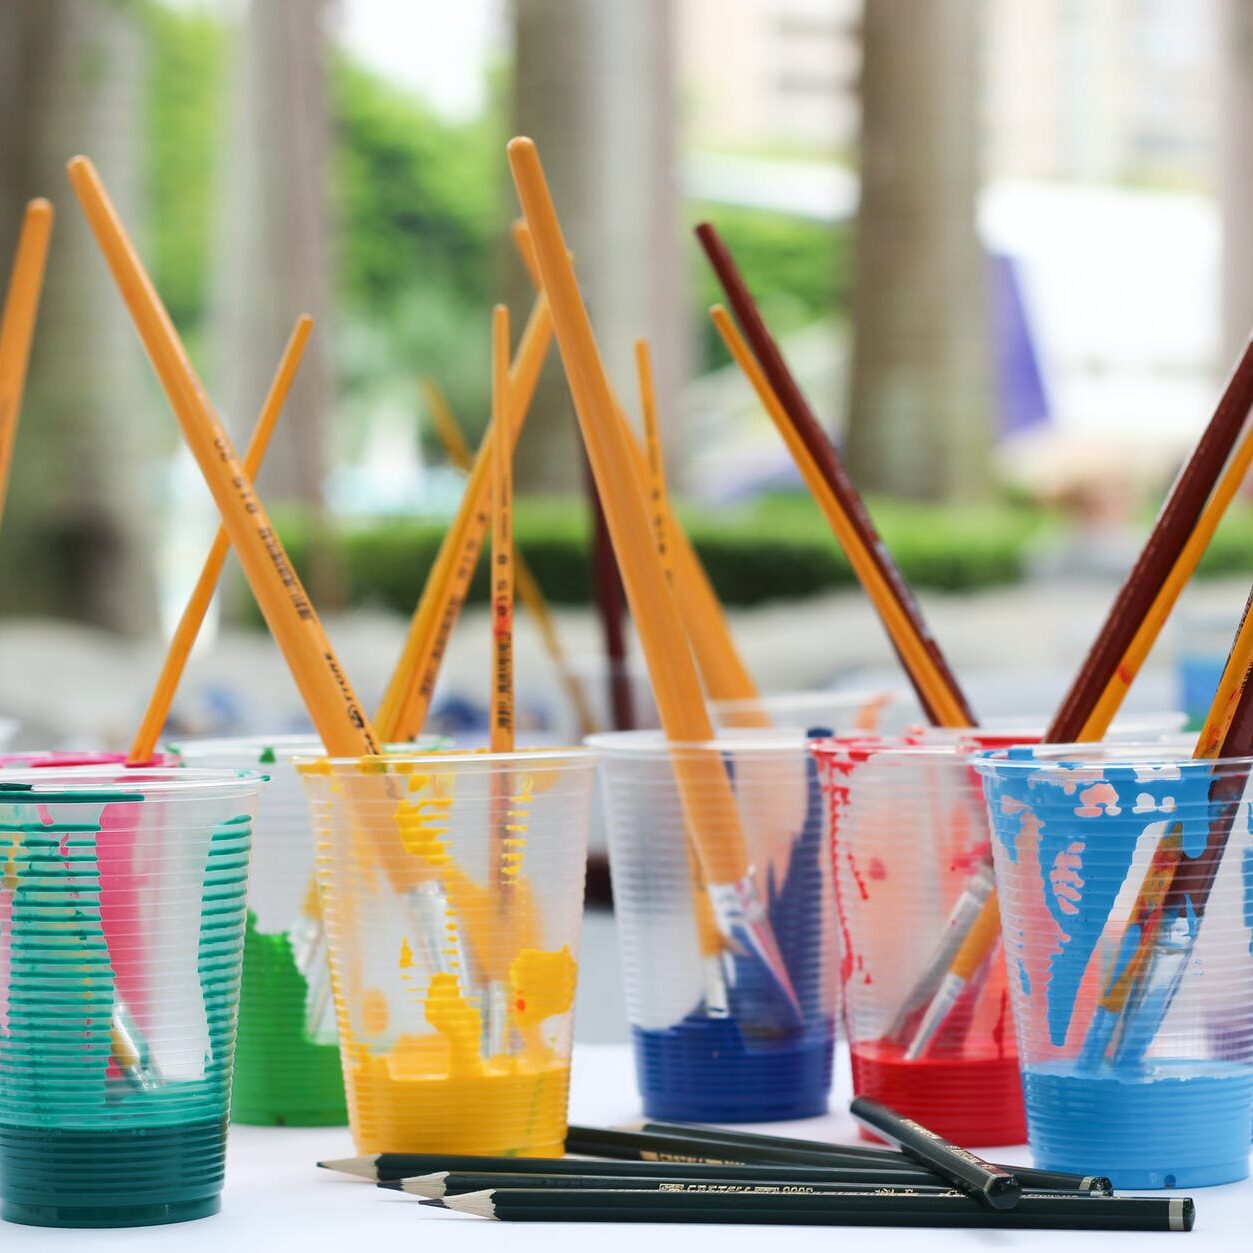 paint brushes inside clear plastic cups